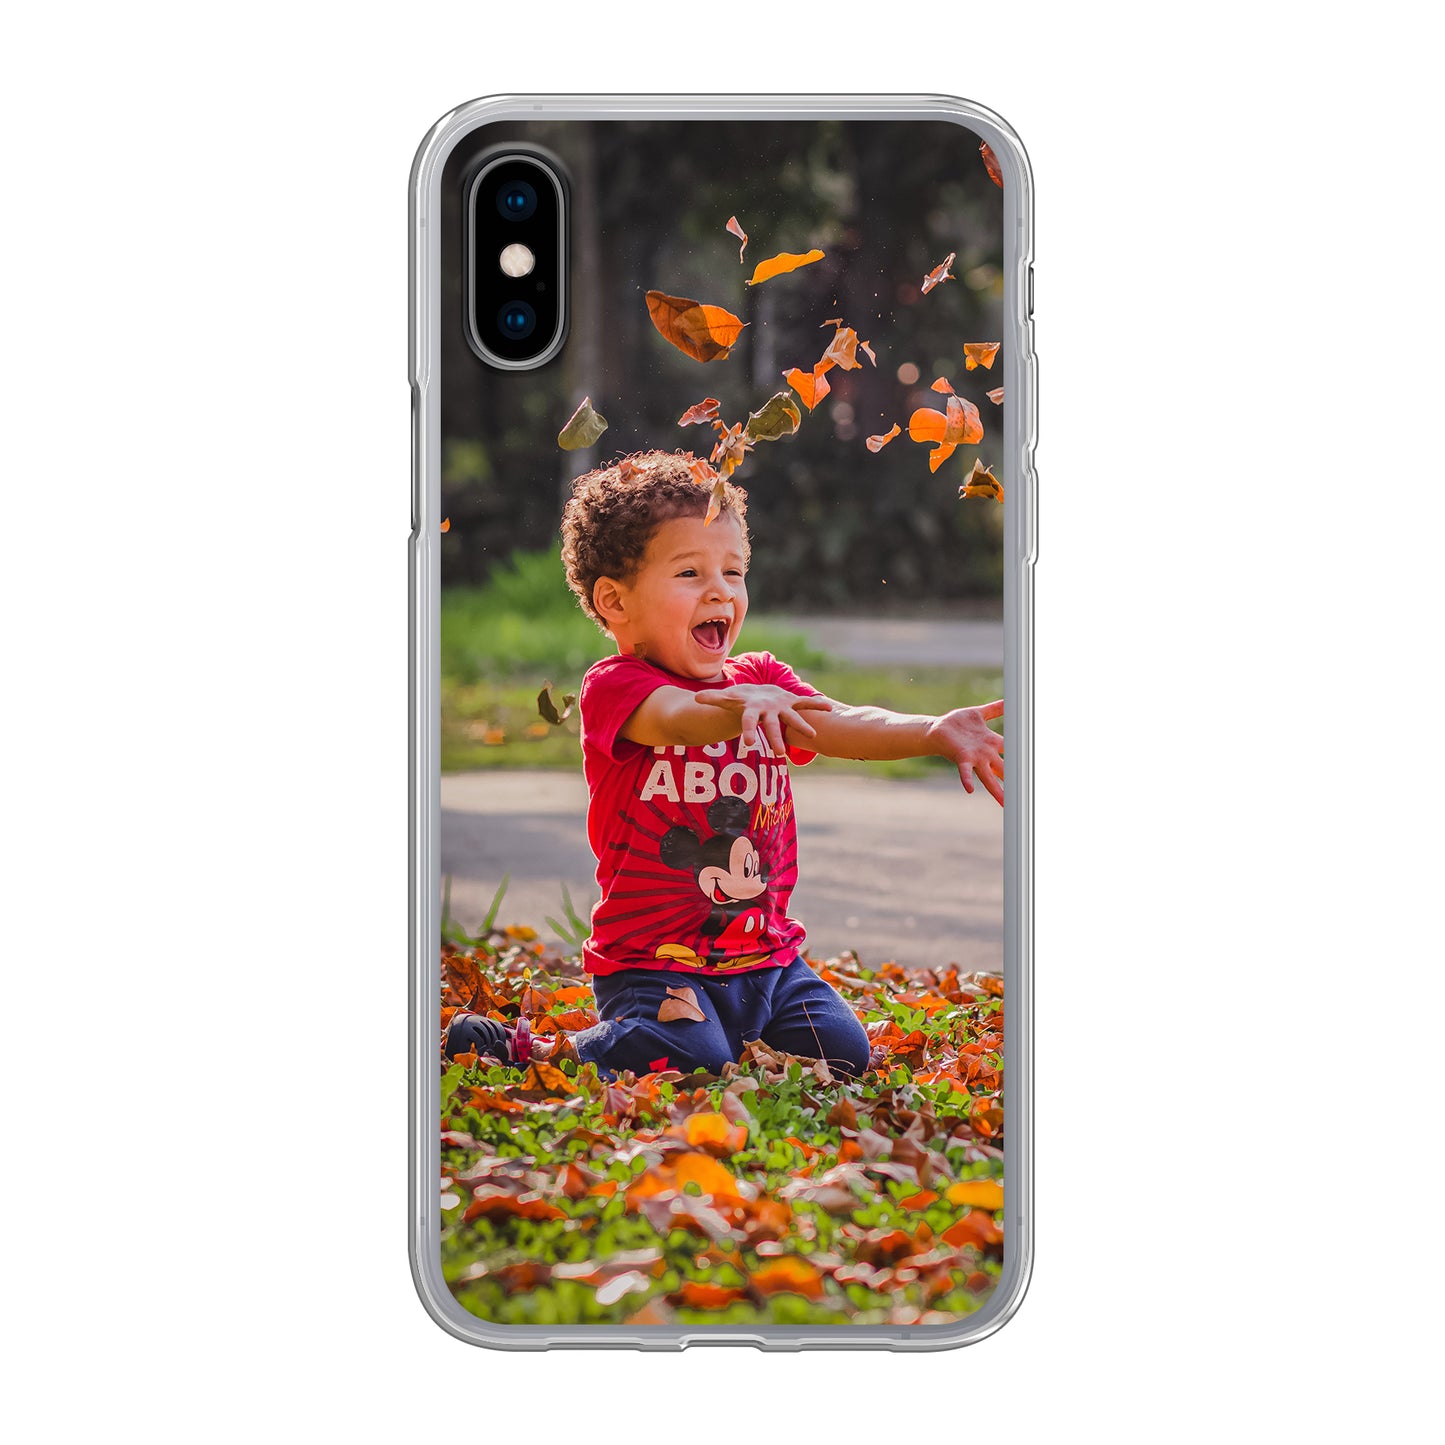 iPhone X / Xs Hülle Softcase transparent